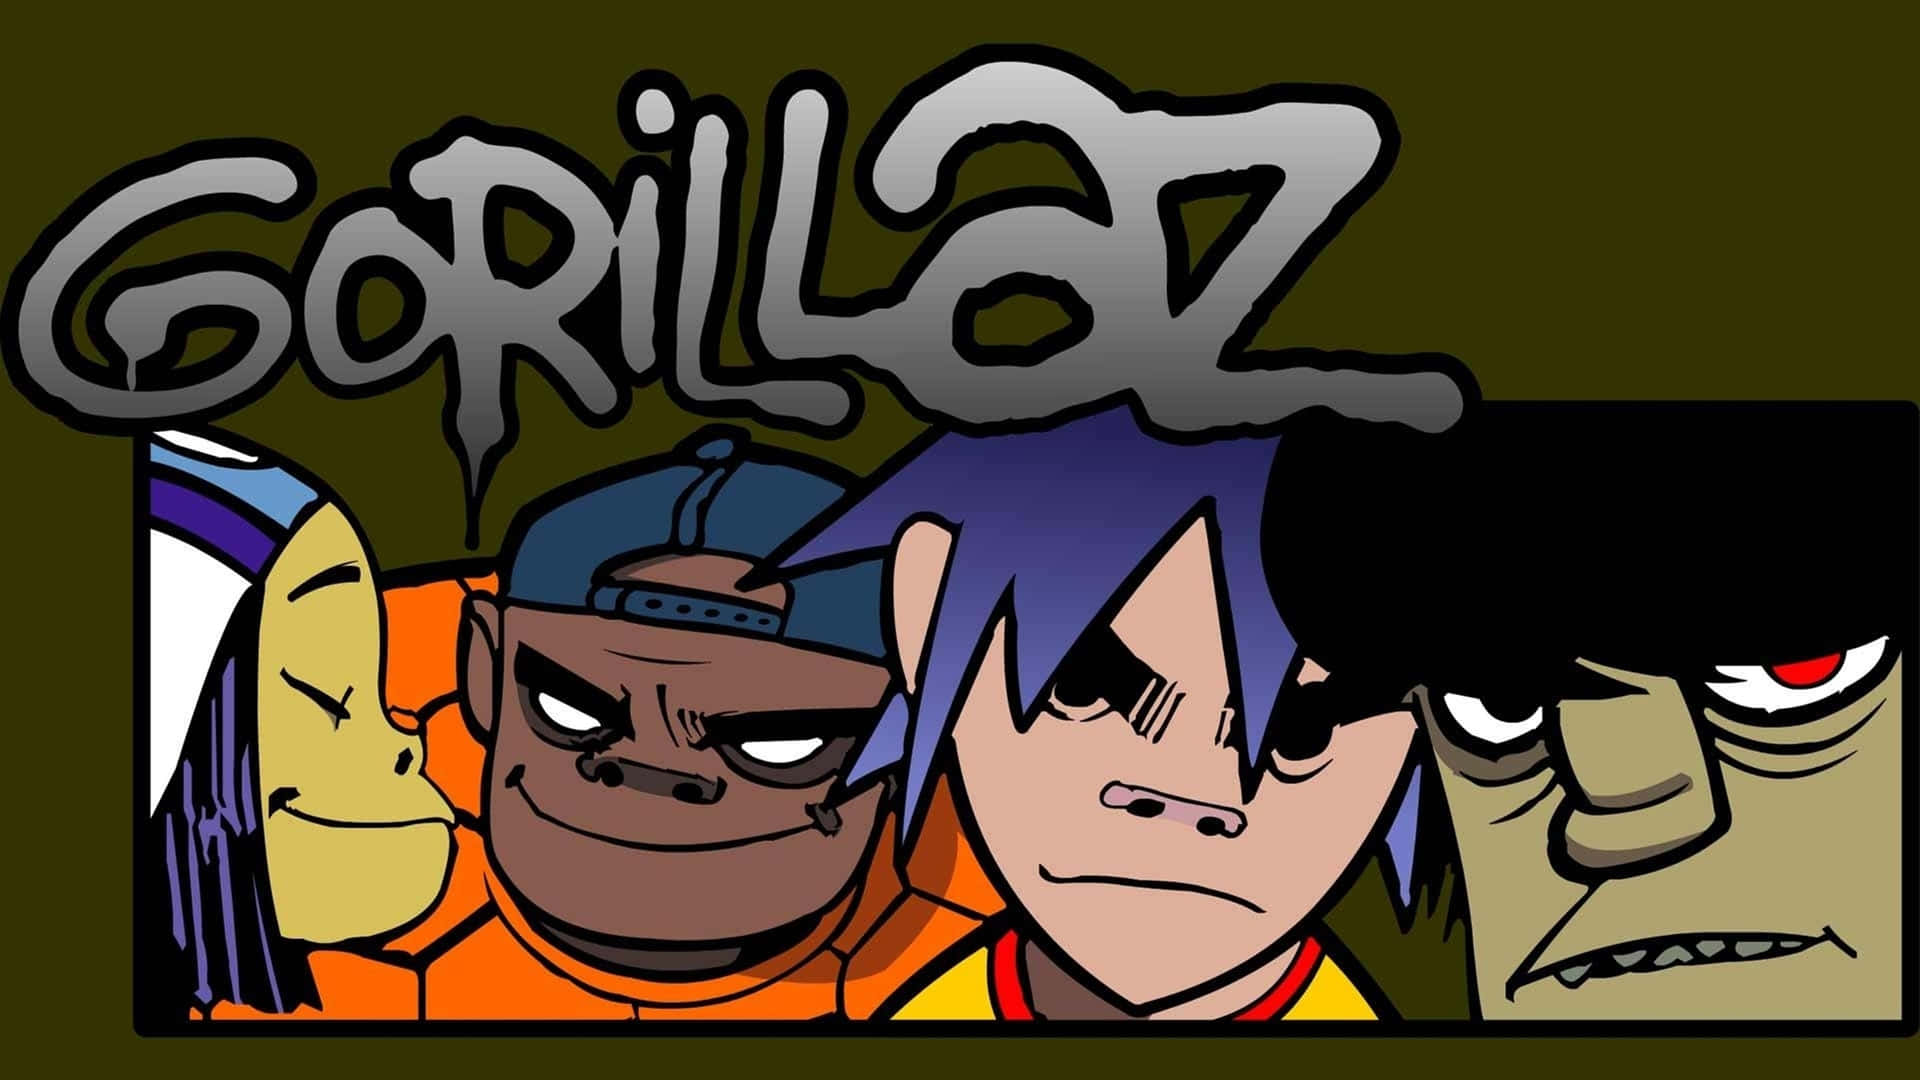 Gorillaz's virtual band members - 2D, Murdoc, Noodle and Russel - as illustrated in HD 4K glory. Wallpaper